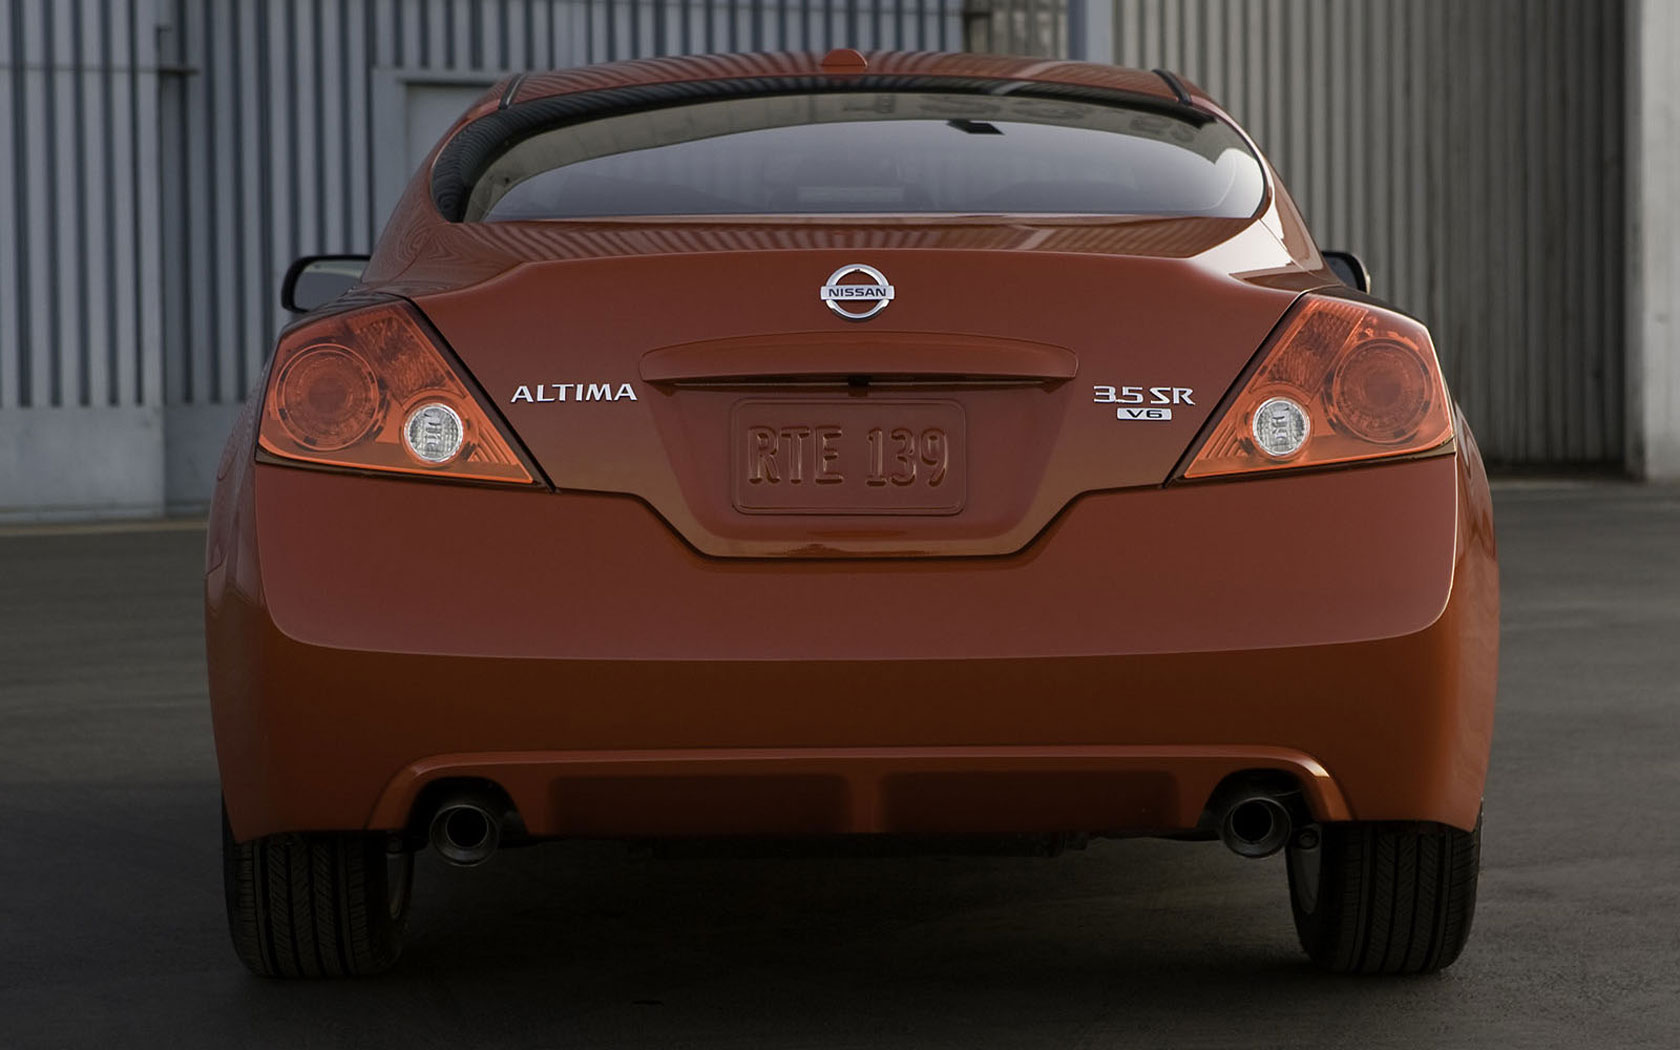  Nissan Altima Coupe 